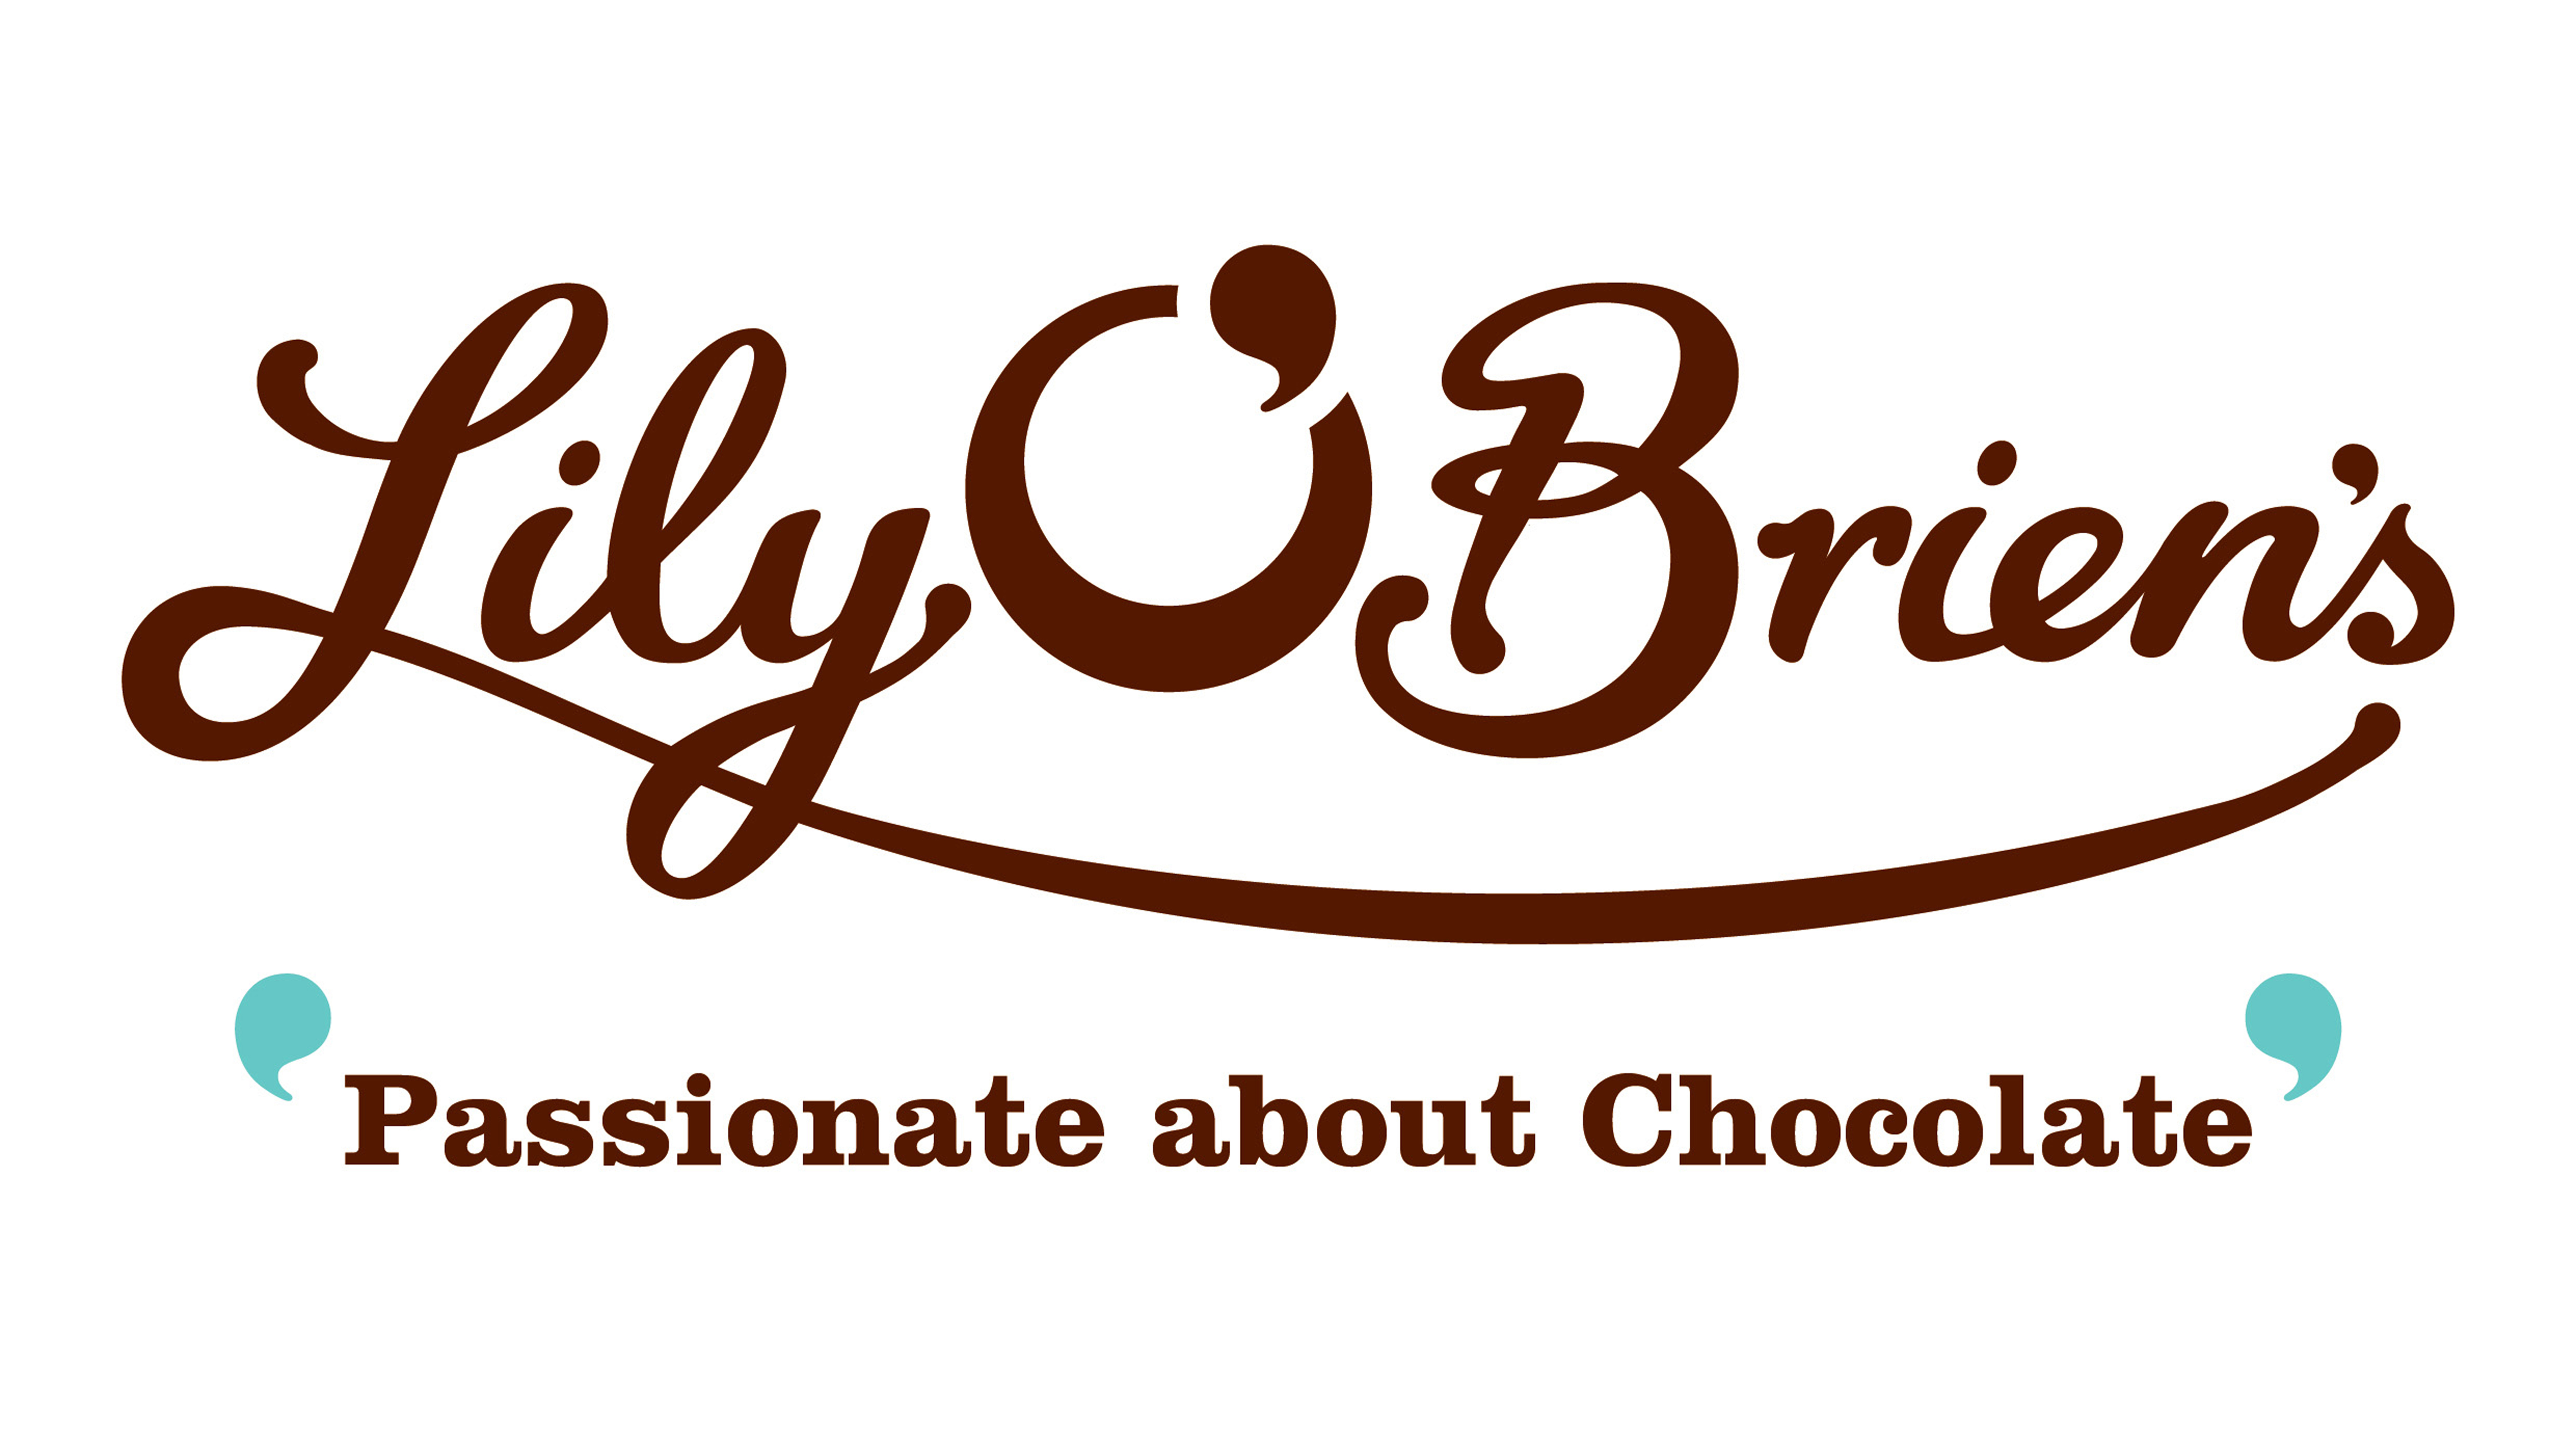 Image of Lily O'Brien's Chocolates logotype